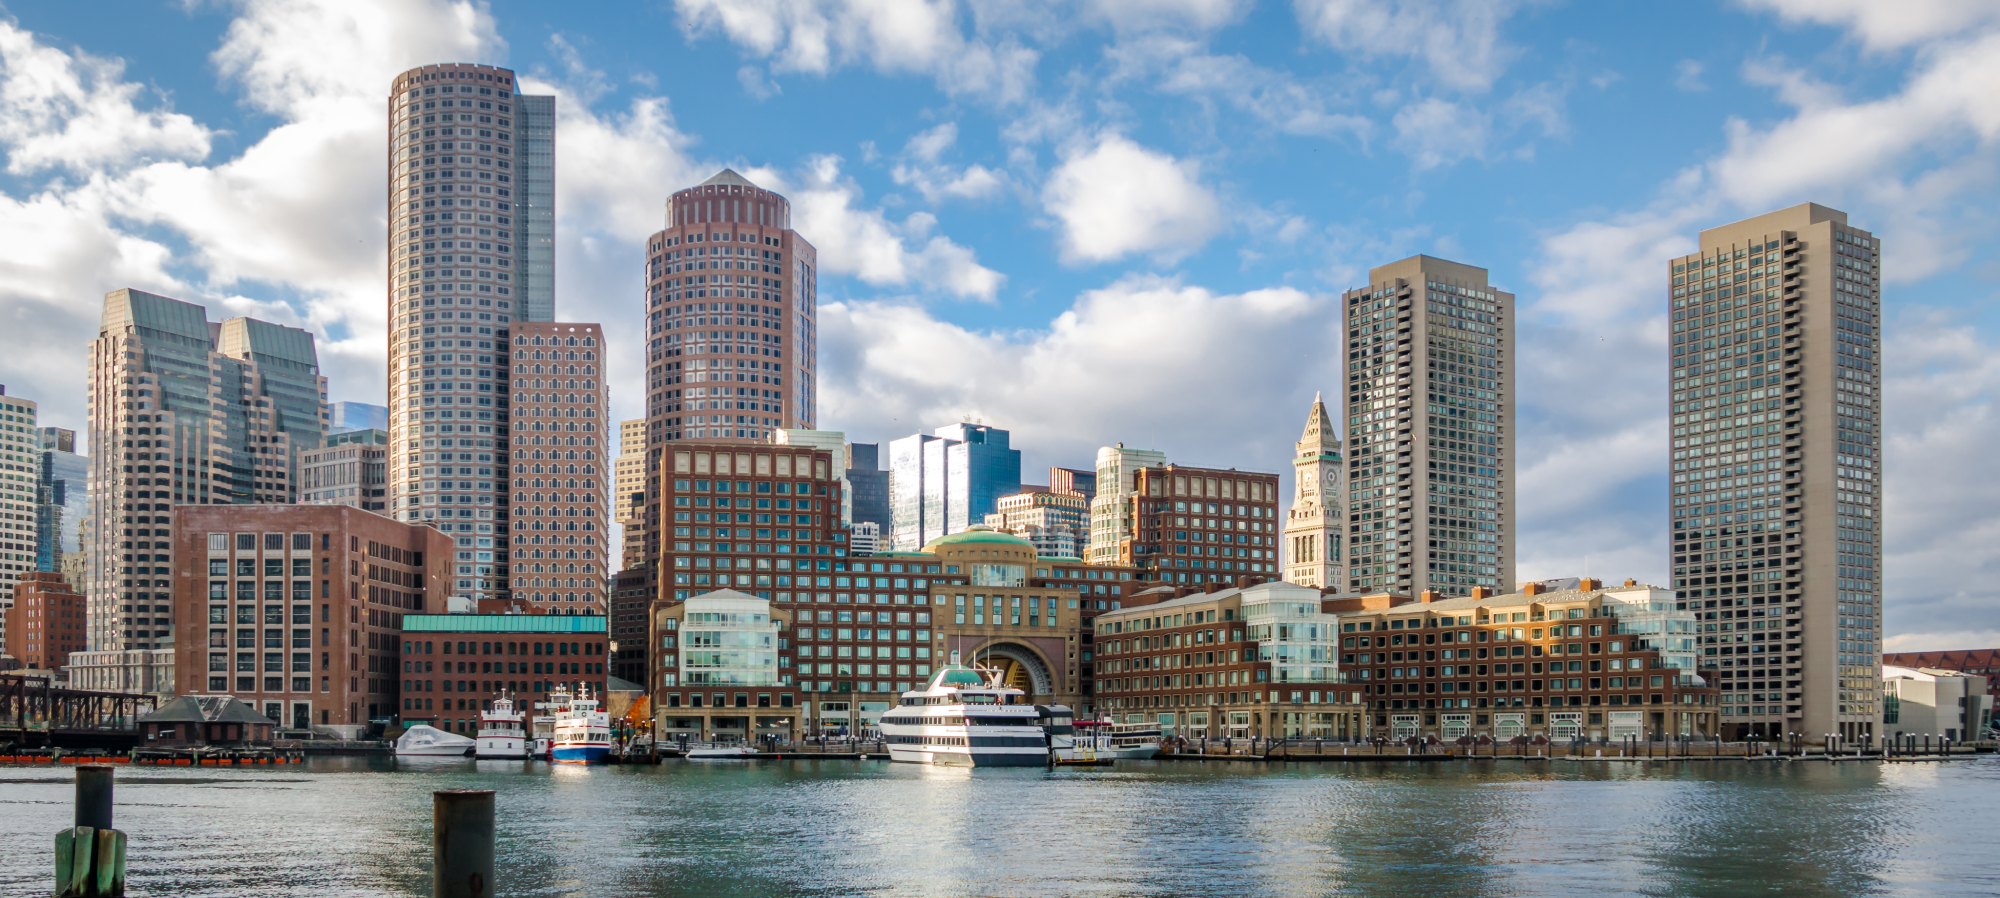 Boston Harbor and Financial District 